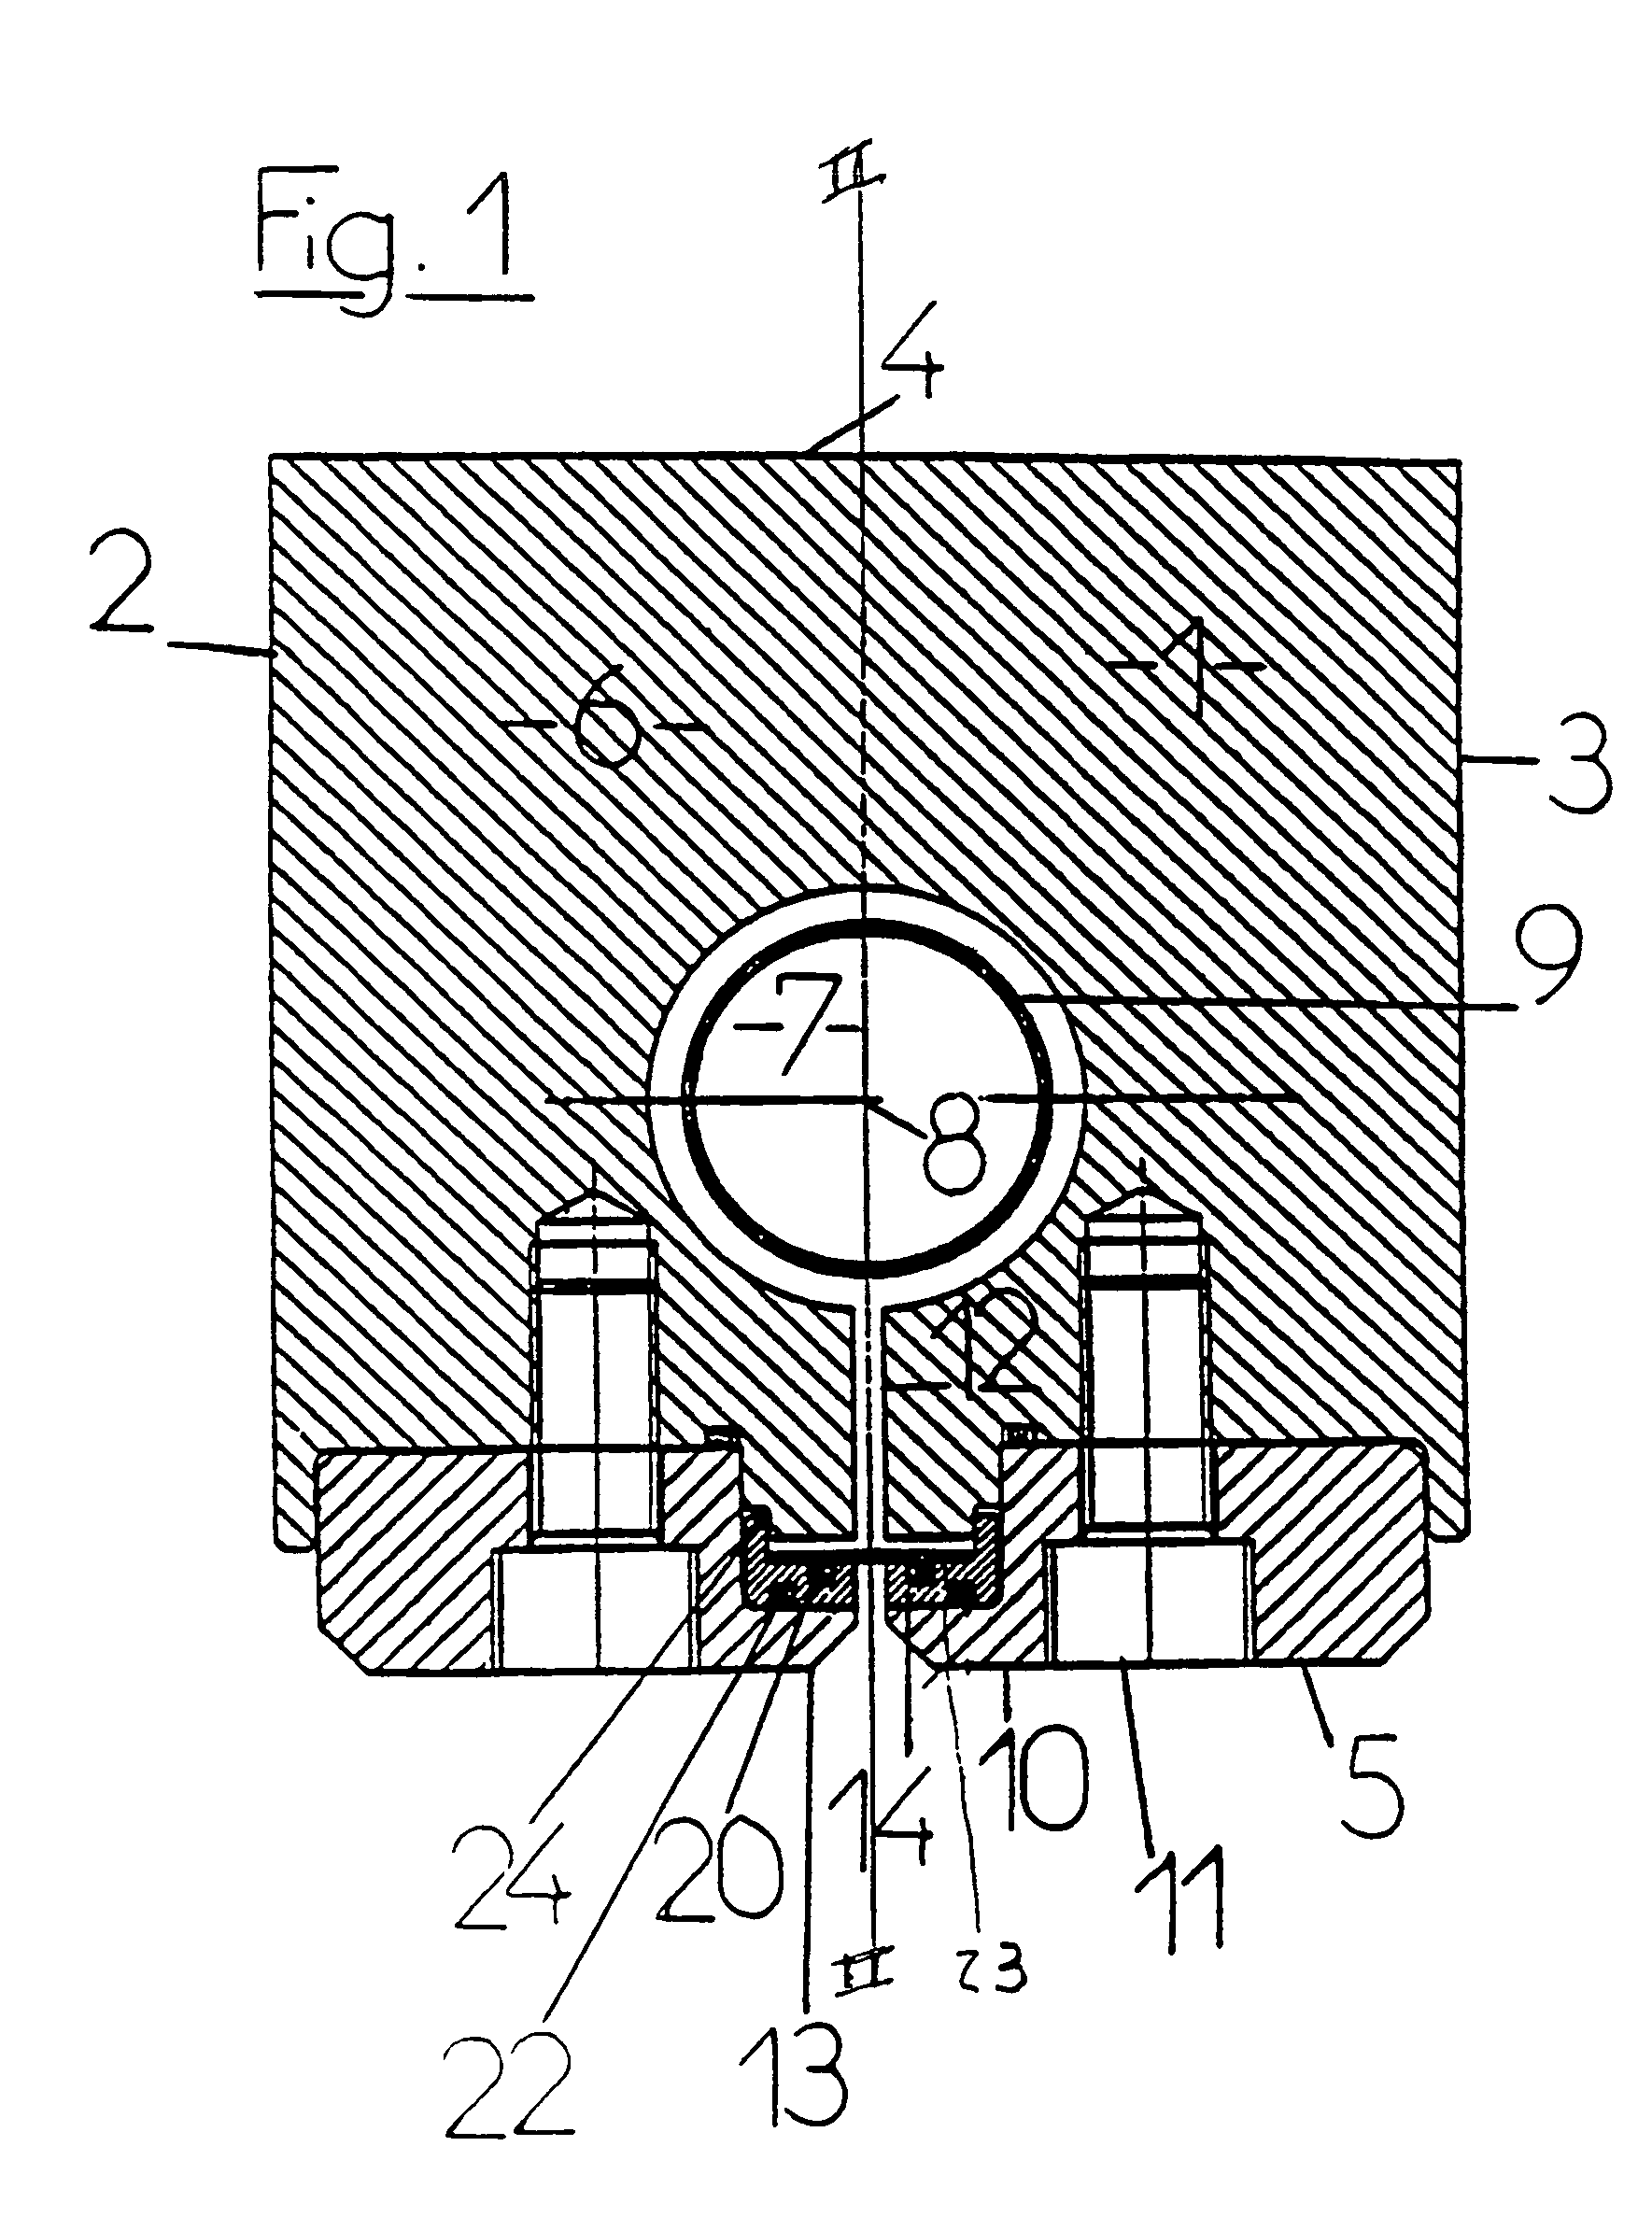 Device for spraying water jets with removable seal support